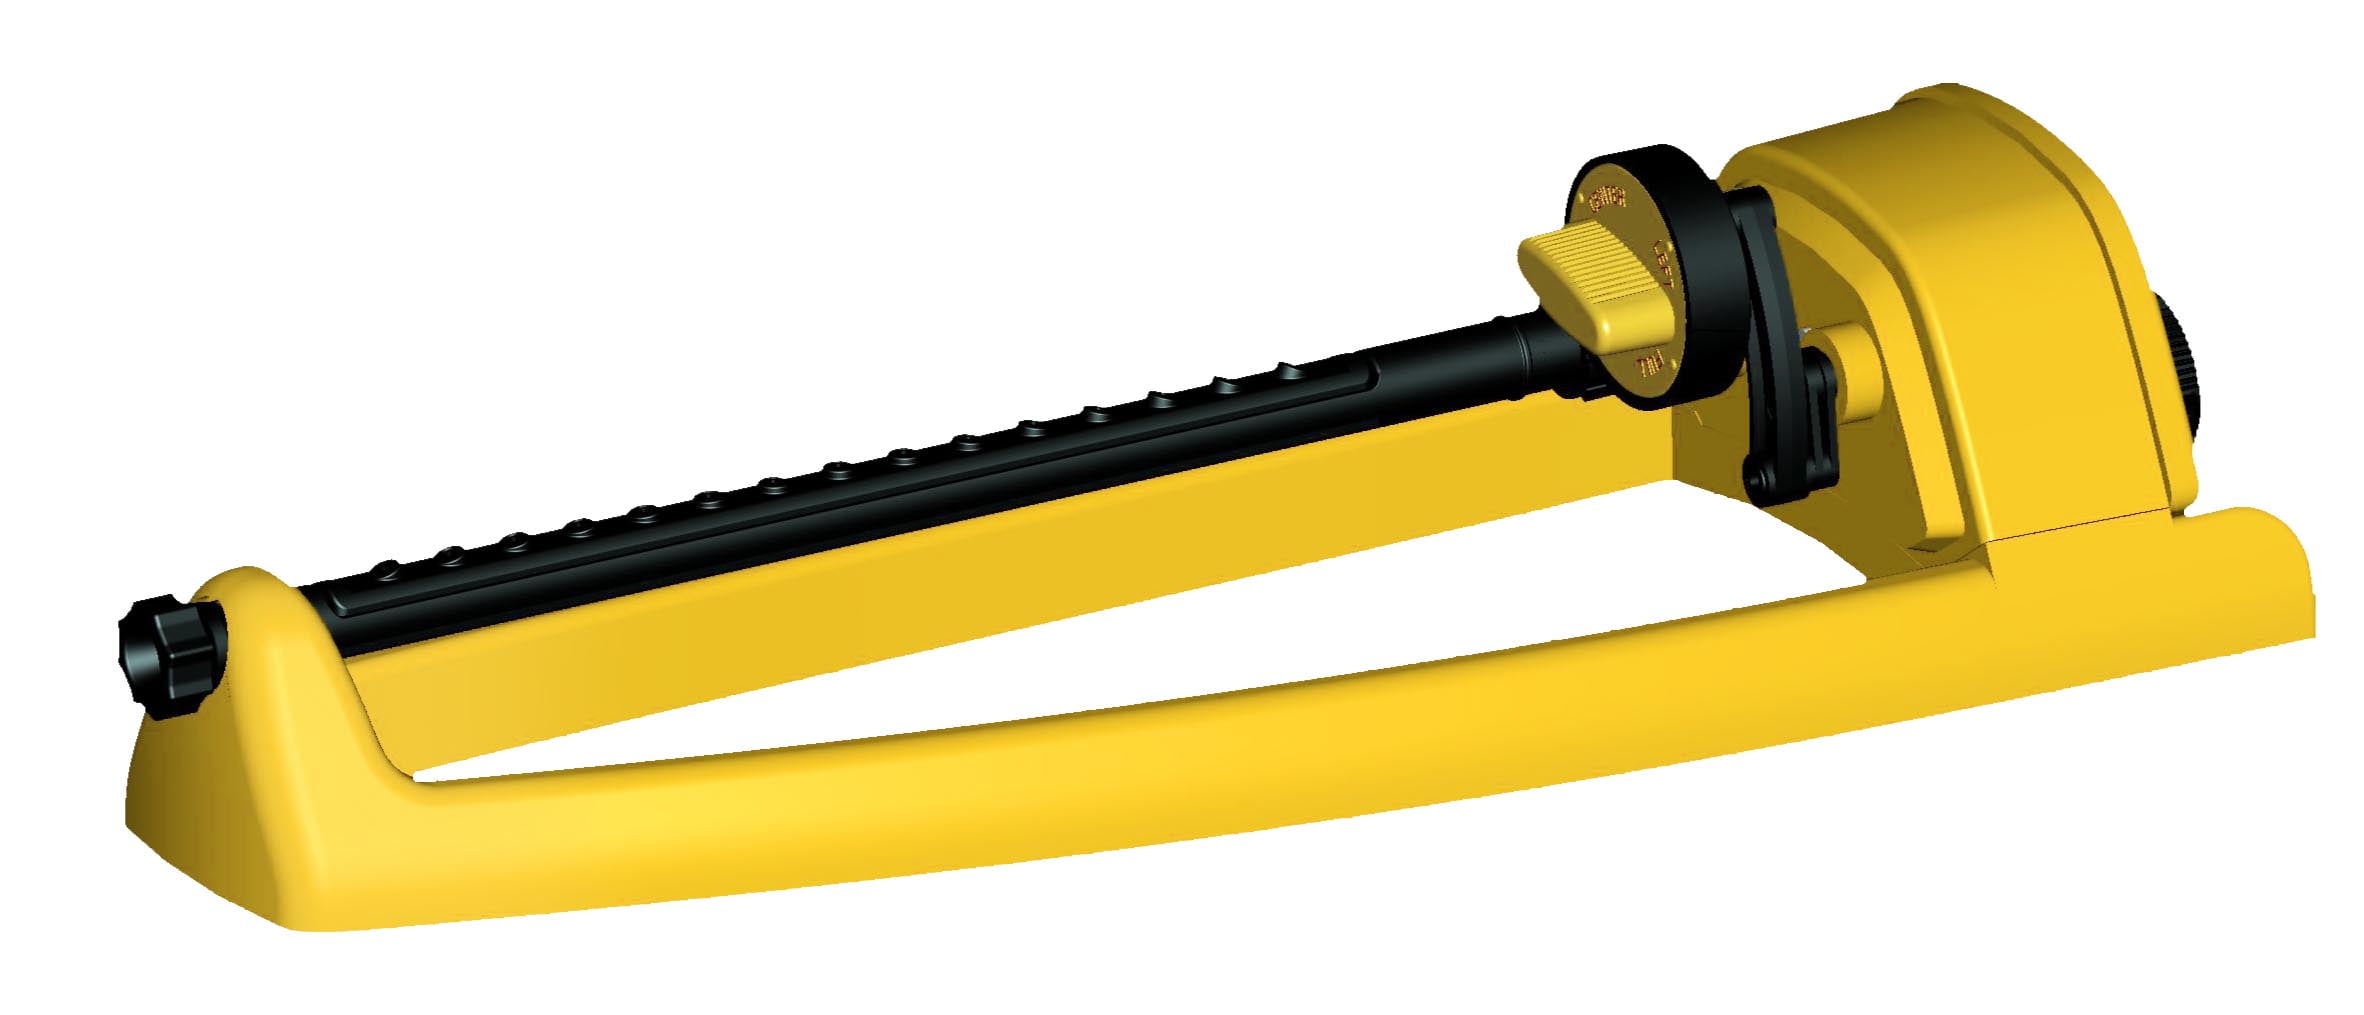 NEW WITH TAGS EXPERT GARDENER 2,600 SQ FOOT YELLOW BLACK OSCILLATING SPRINKLER 